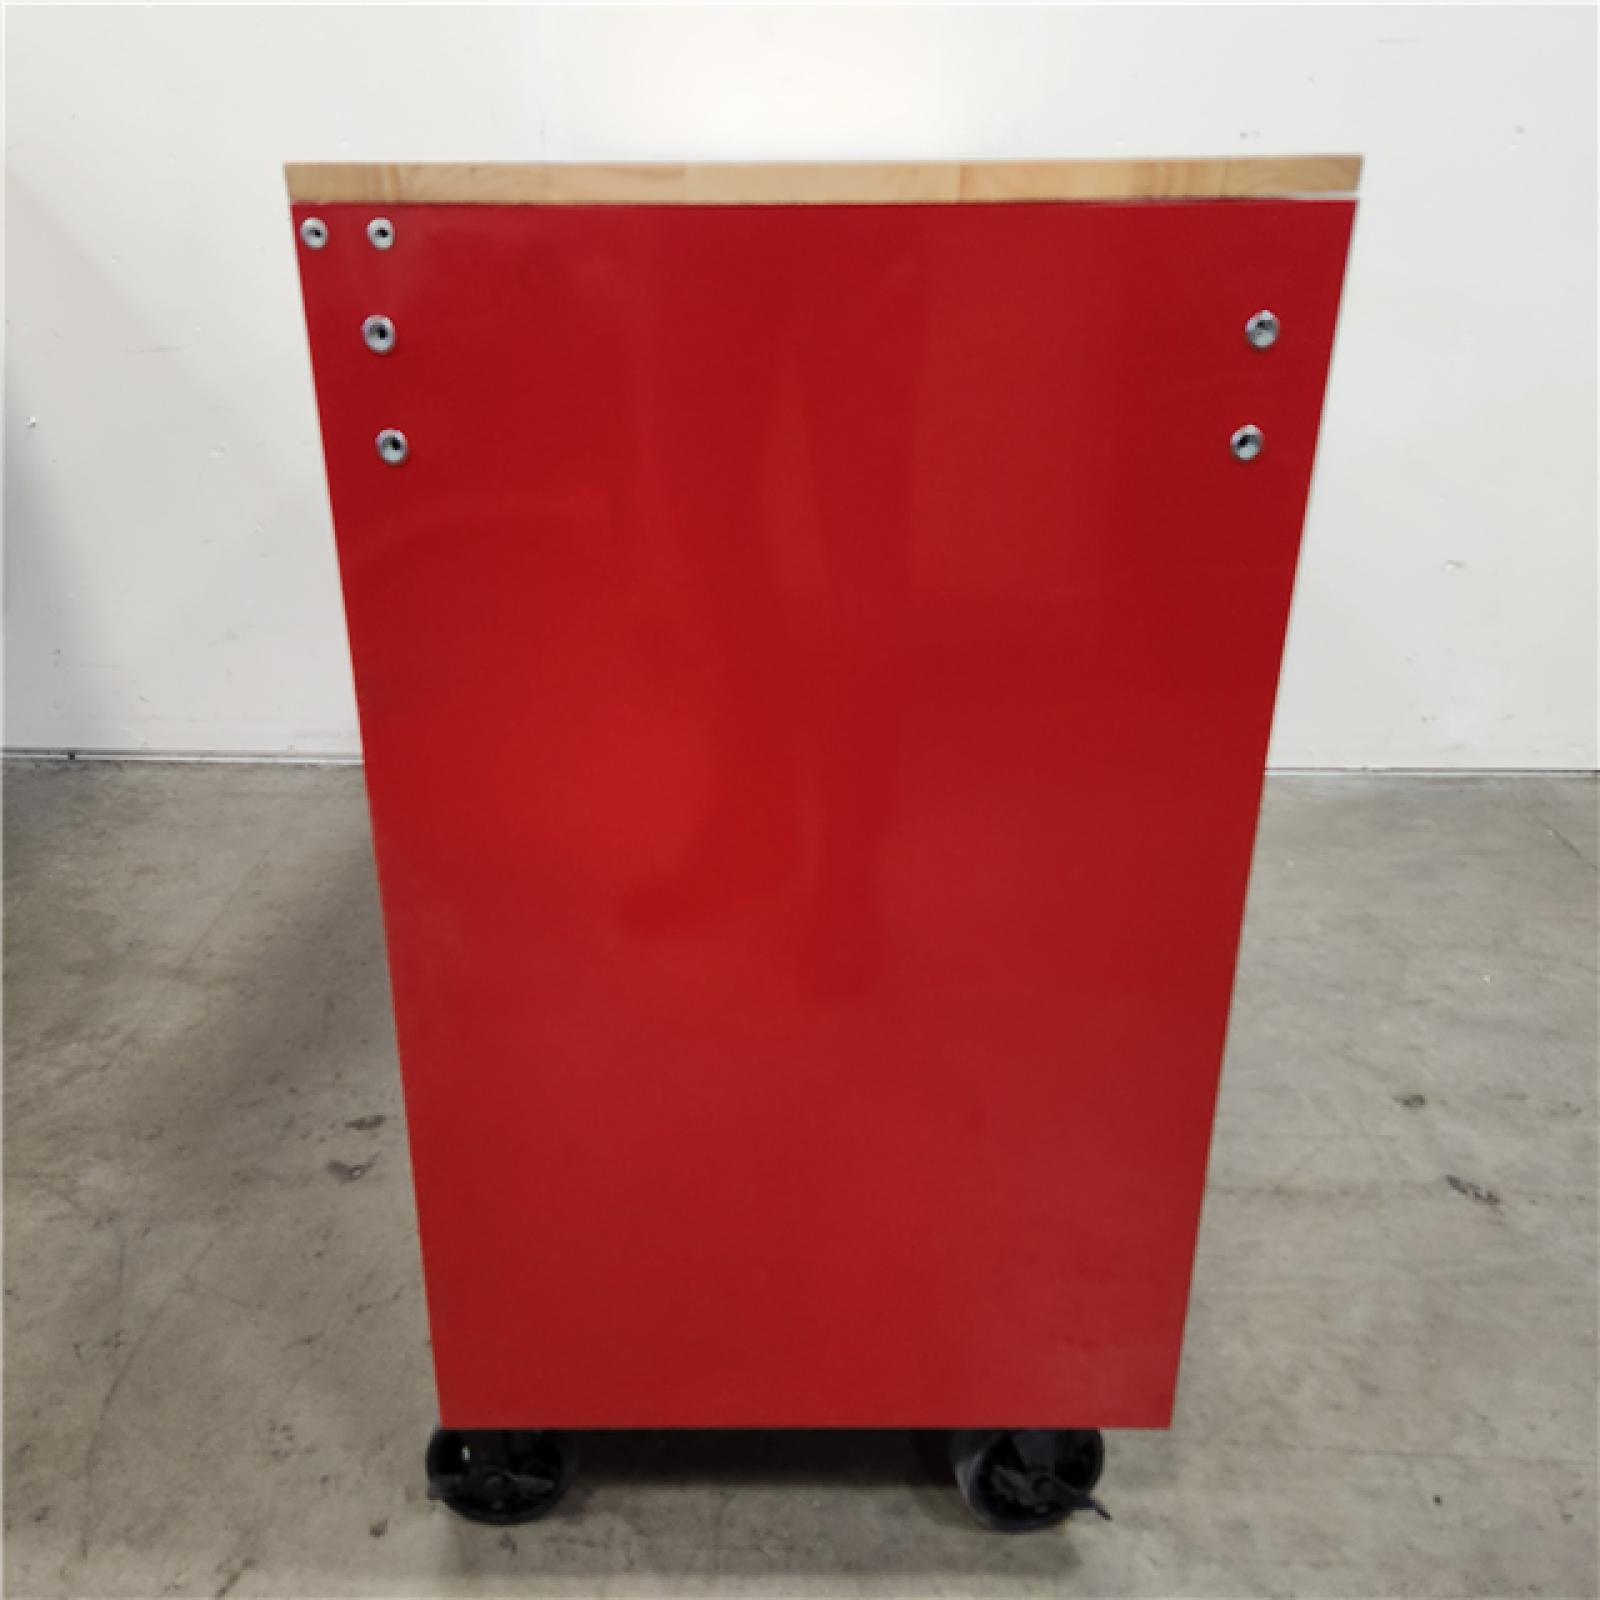 Phoenix Location 60 in. W x 22 in. D Standard Duty 12-Drawer Mobile Workbench Cabinet with Solid Wood Top in Gloss Red